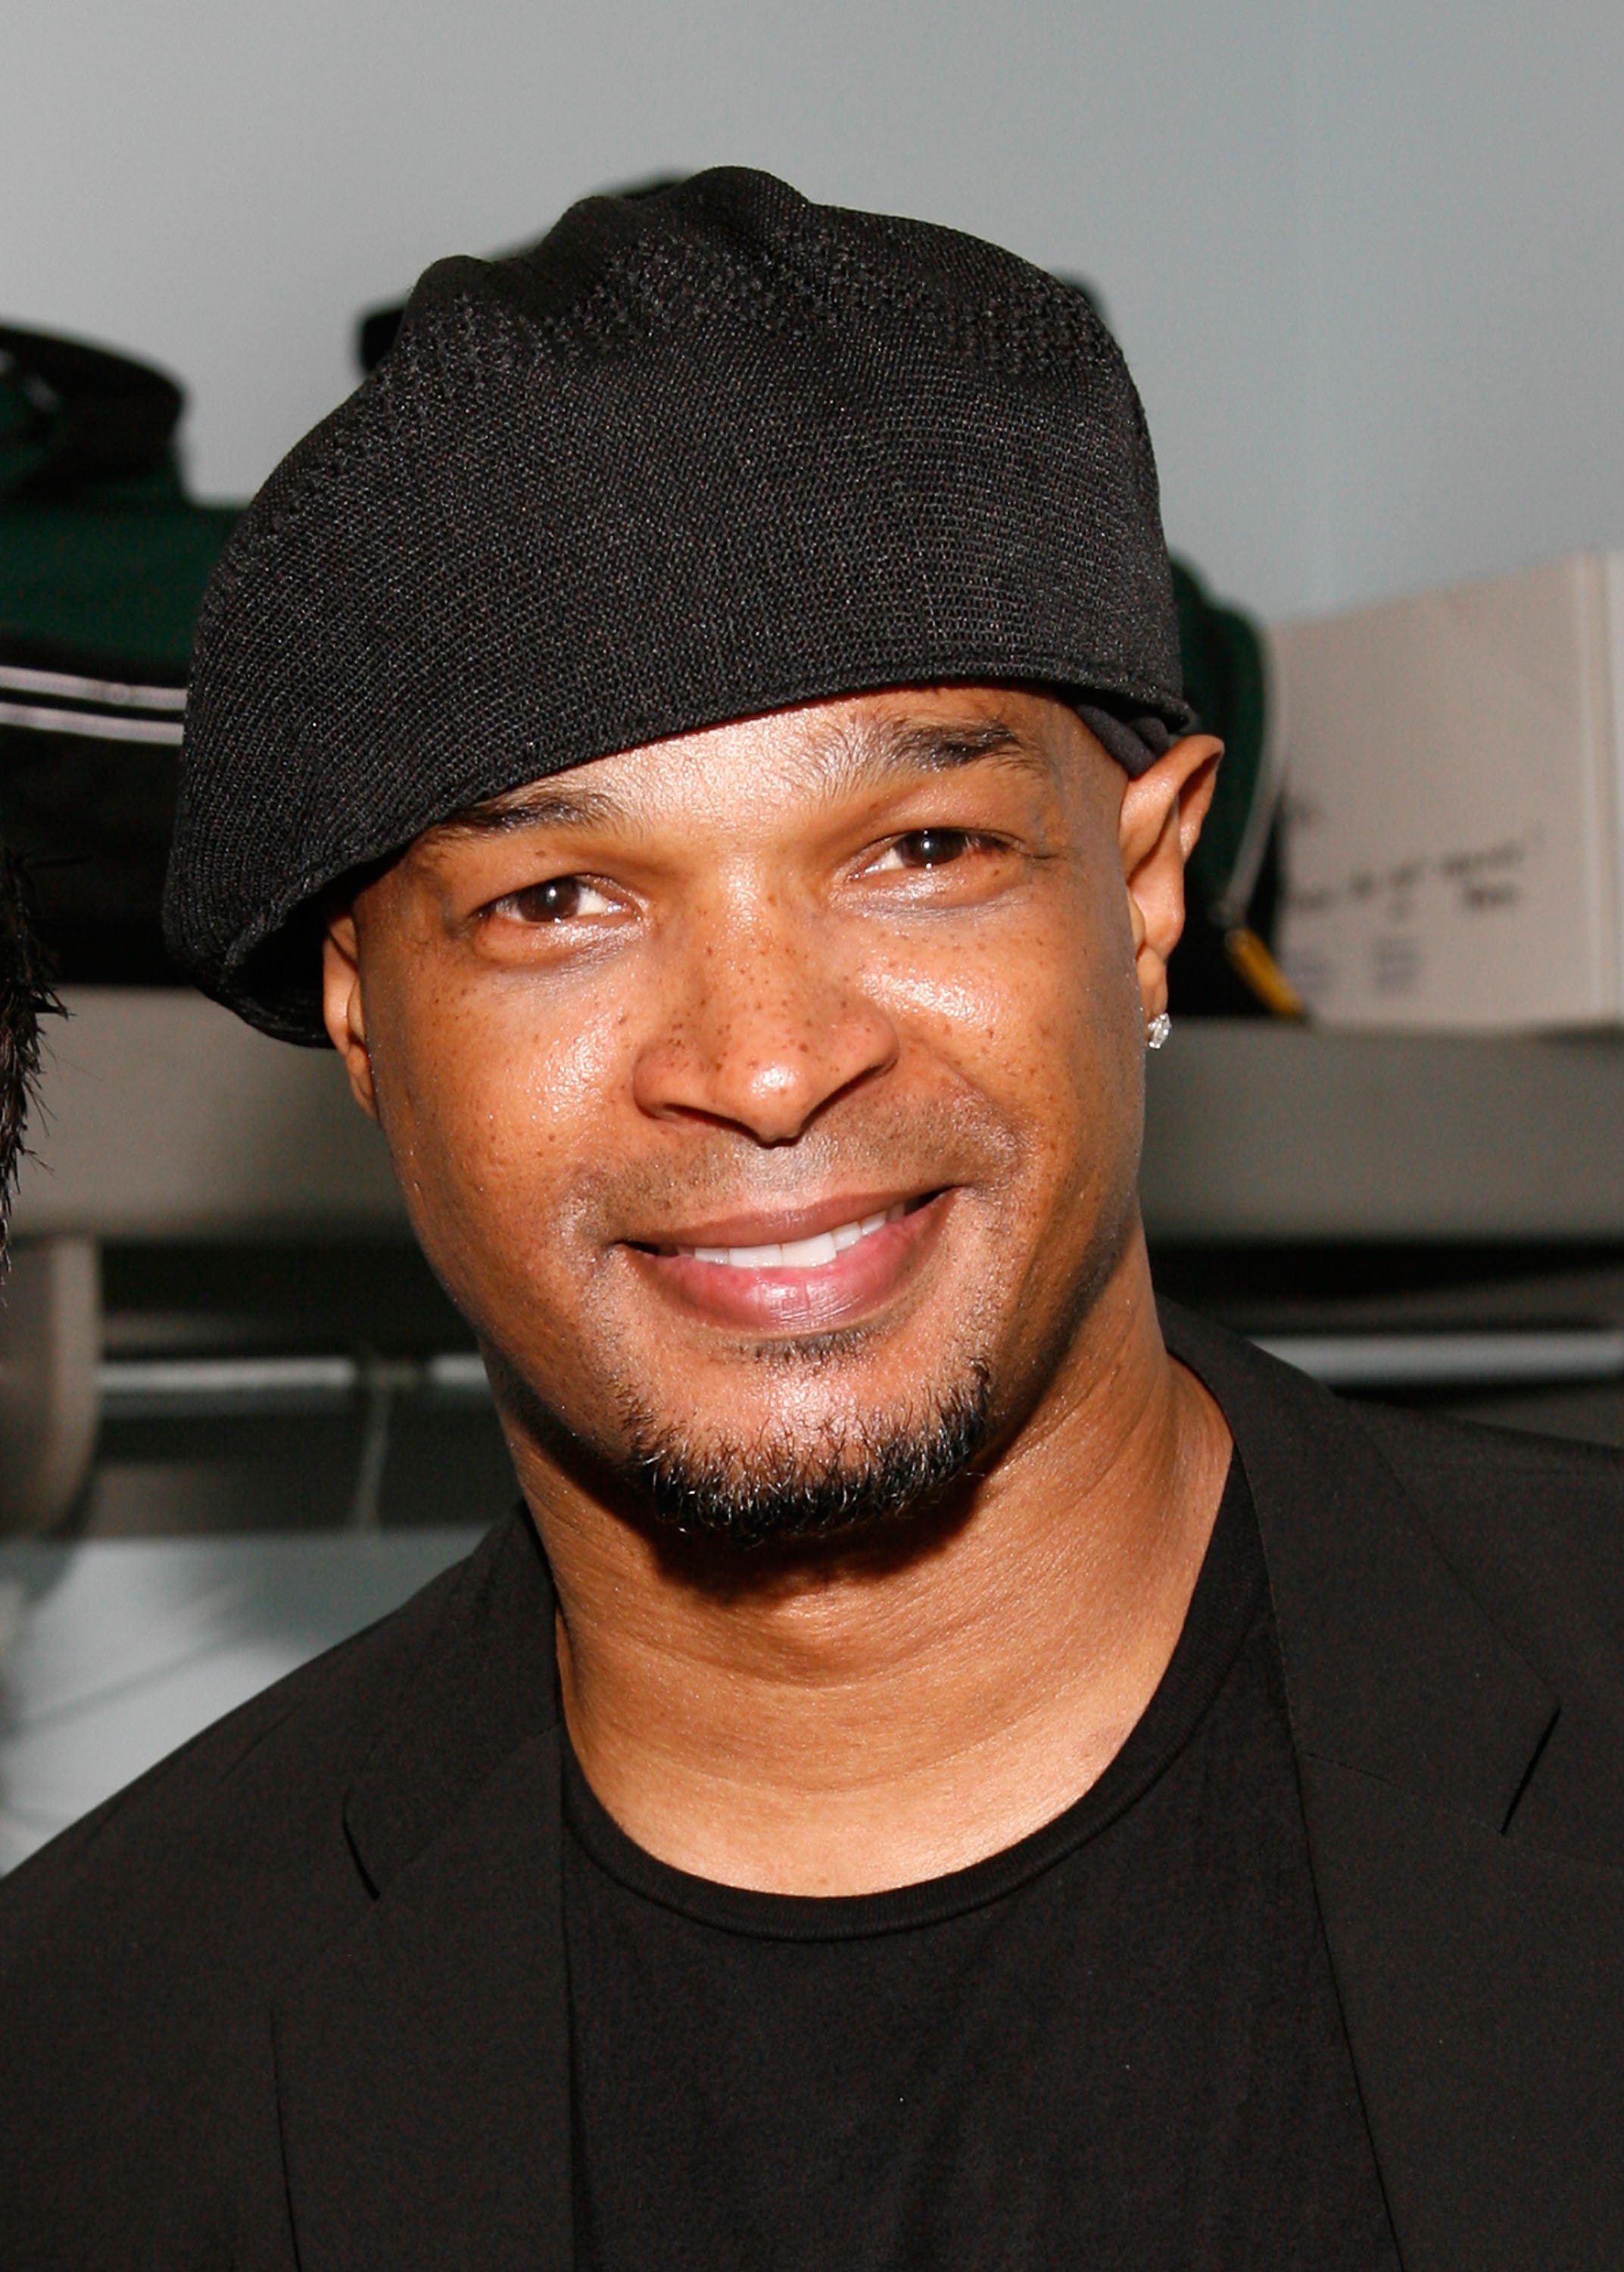 Comedian Damon Wayans backstage at Theatre St. Denis during the Just for Laughs Festival on July 20, 2007 | Photo: Getty Images